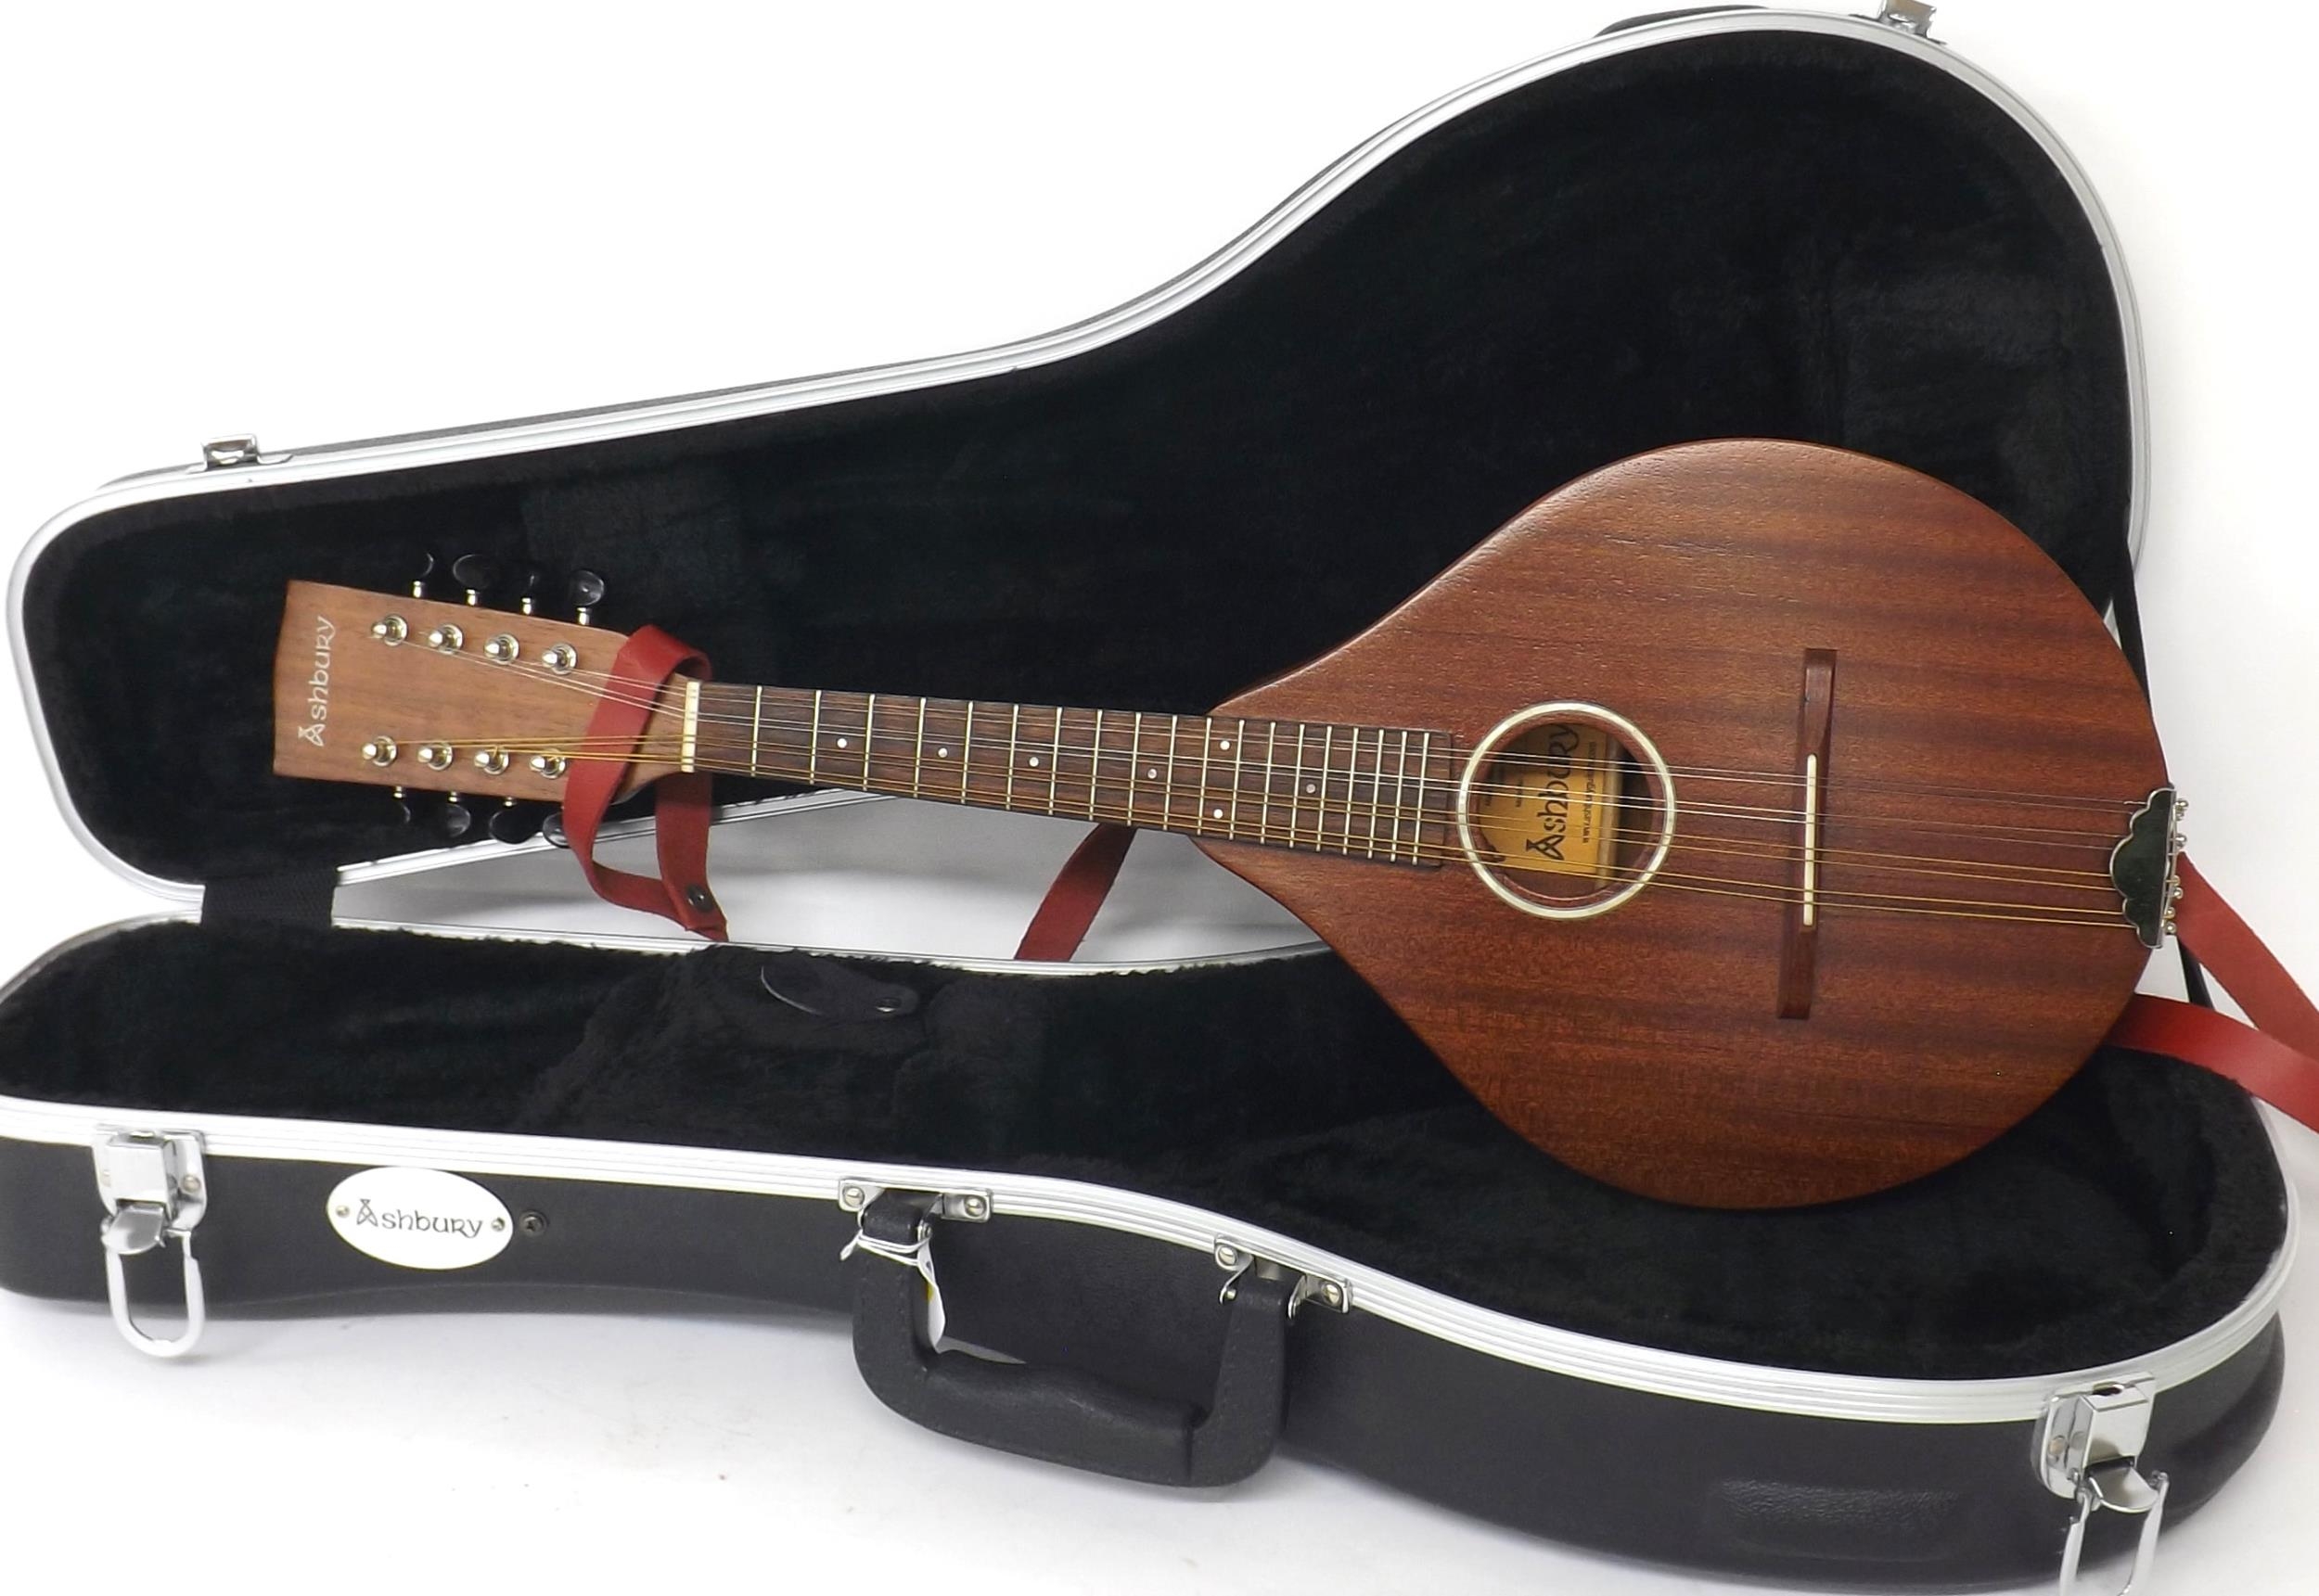 Contemporary mandolin by and labelled Ashbury, model no: AM130..., with pear shaped body and Ashbury - Image 3 of 3